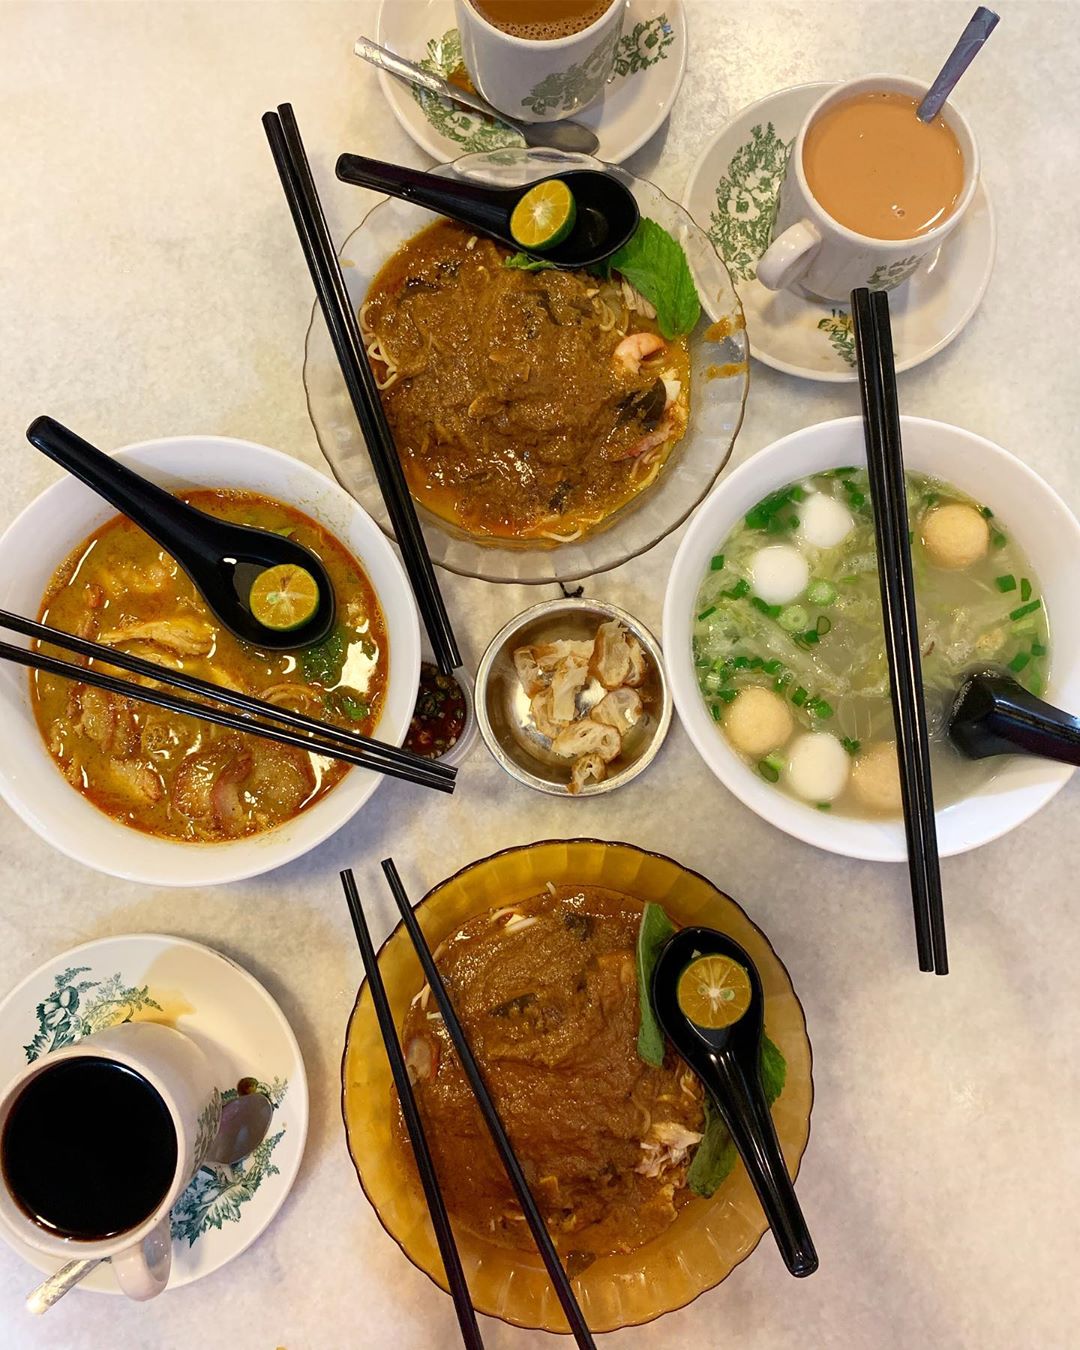 Top 10 Places To Check Out For Breakfast In Ipoh - Foodie